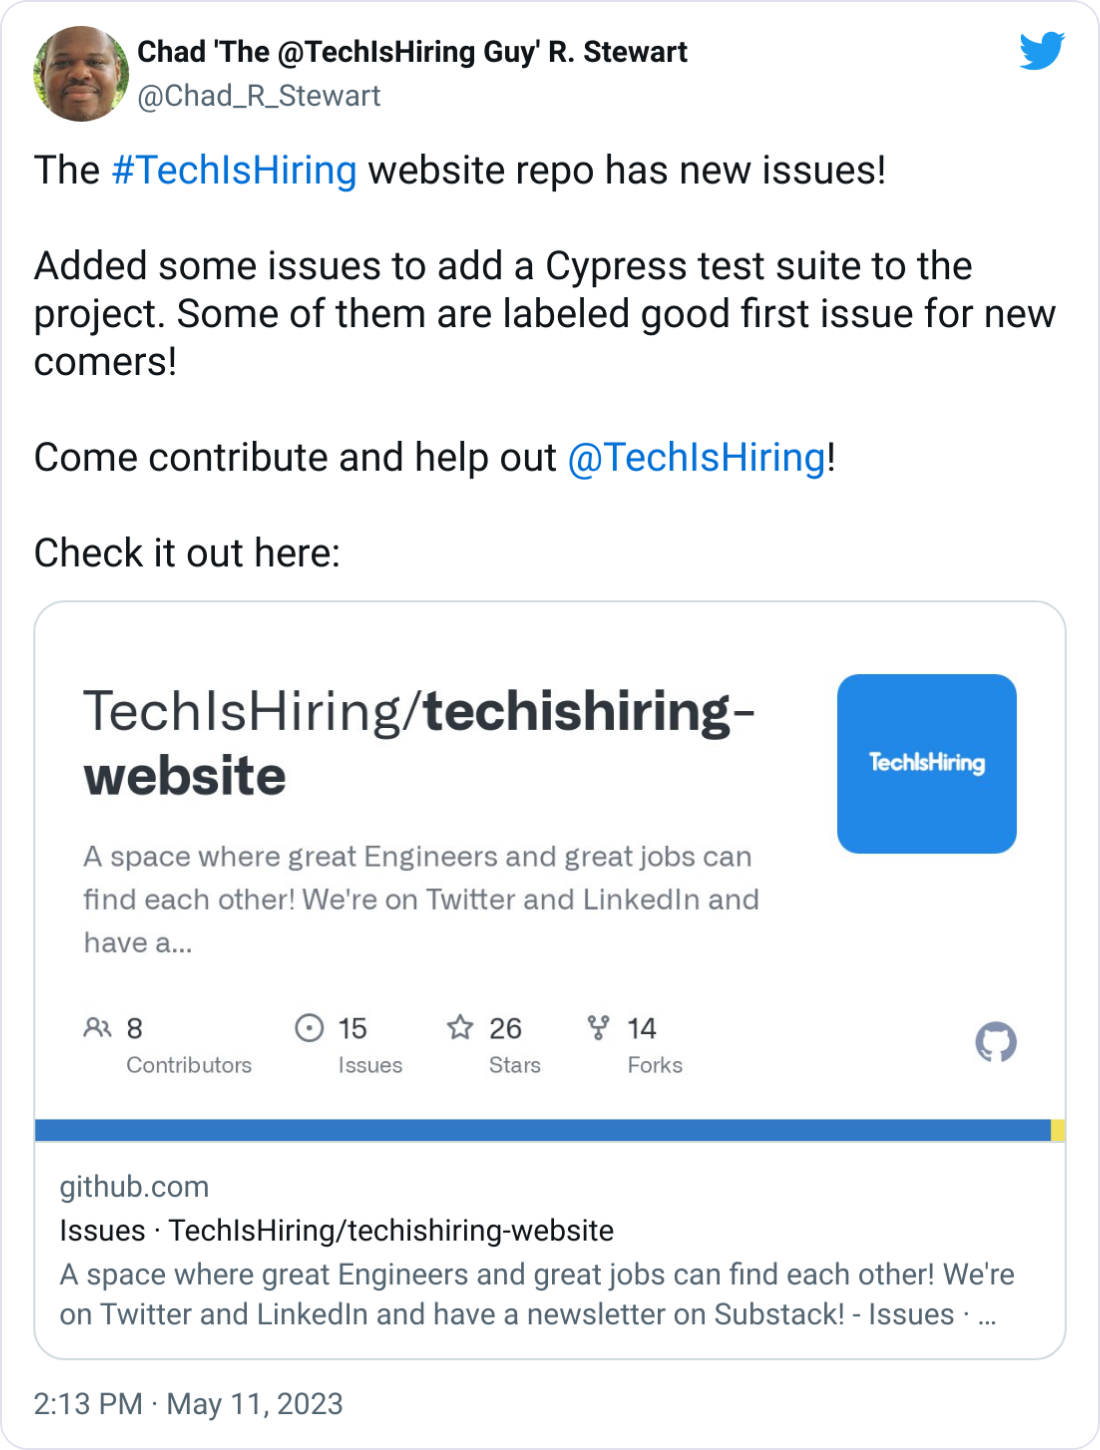 Chad 'The @TechIsHiring Guy' R. Stewart @Chad_R_Stewart The #TechIsHiring website repo has new issues!  Added some issues to add a Cypress test suite to the project. Some of them are labeled good first issue for new comers!  Come contribute and help out  @TechIsHiring !  Check it out here: